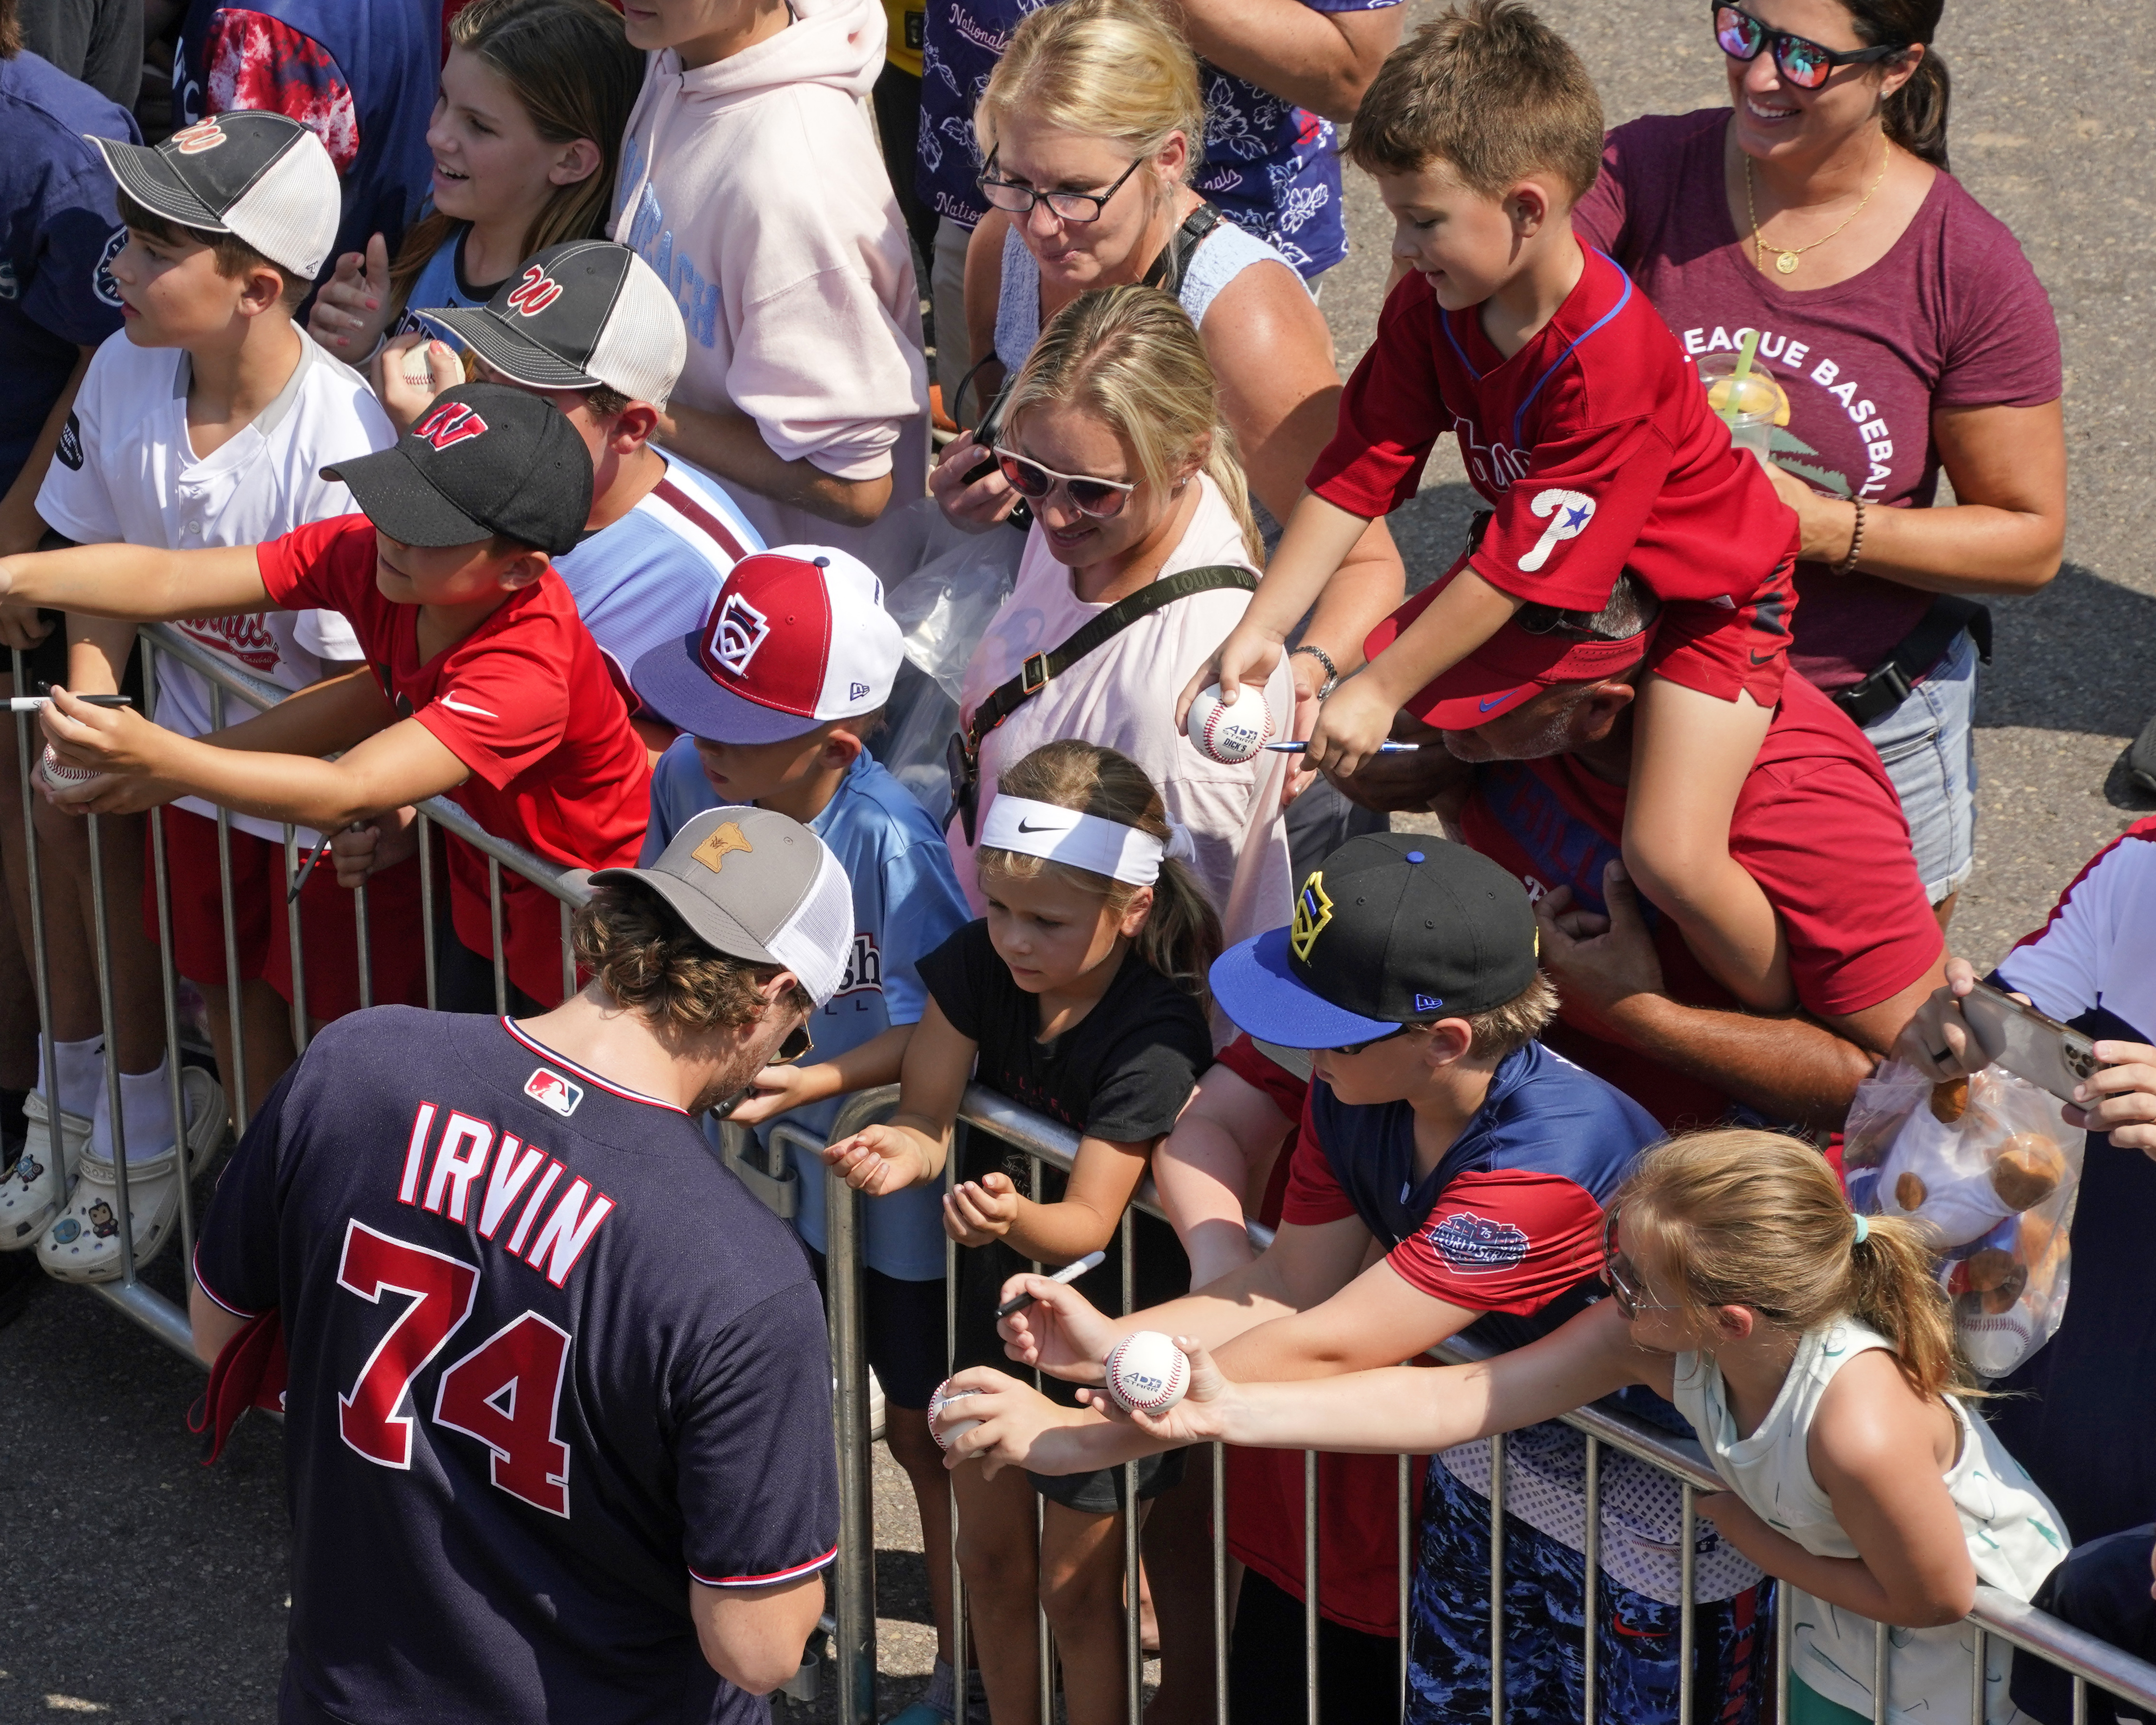 Nationals and Phillies are kids for a day, mingling among Little Leaguers